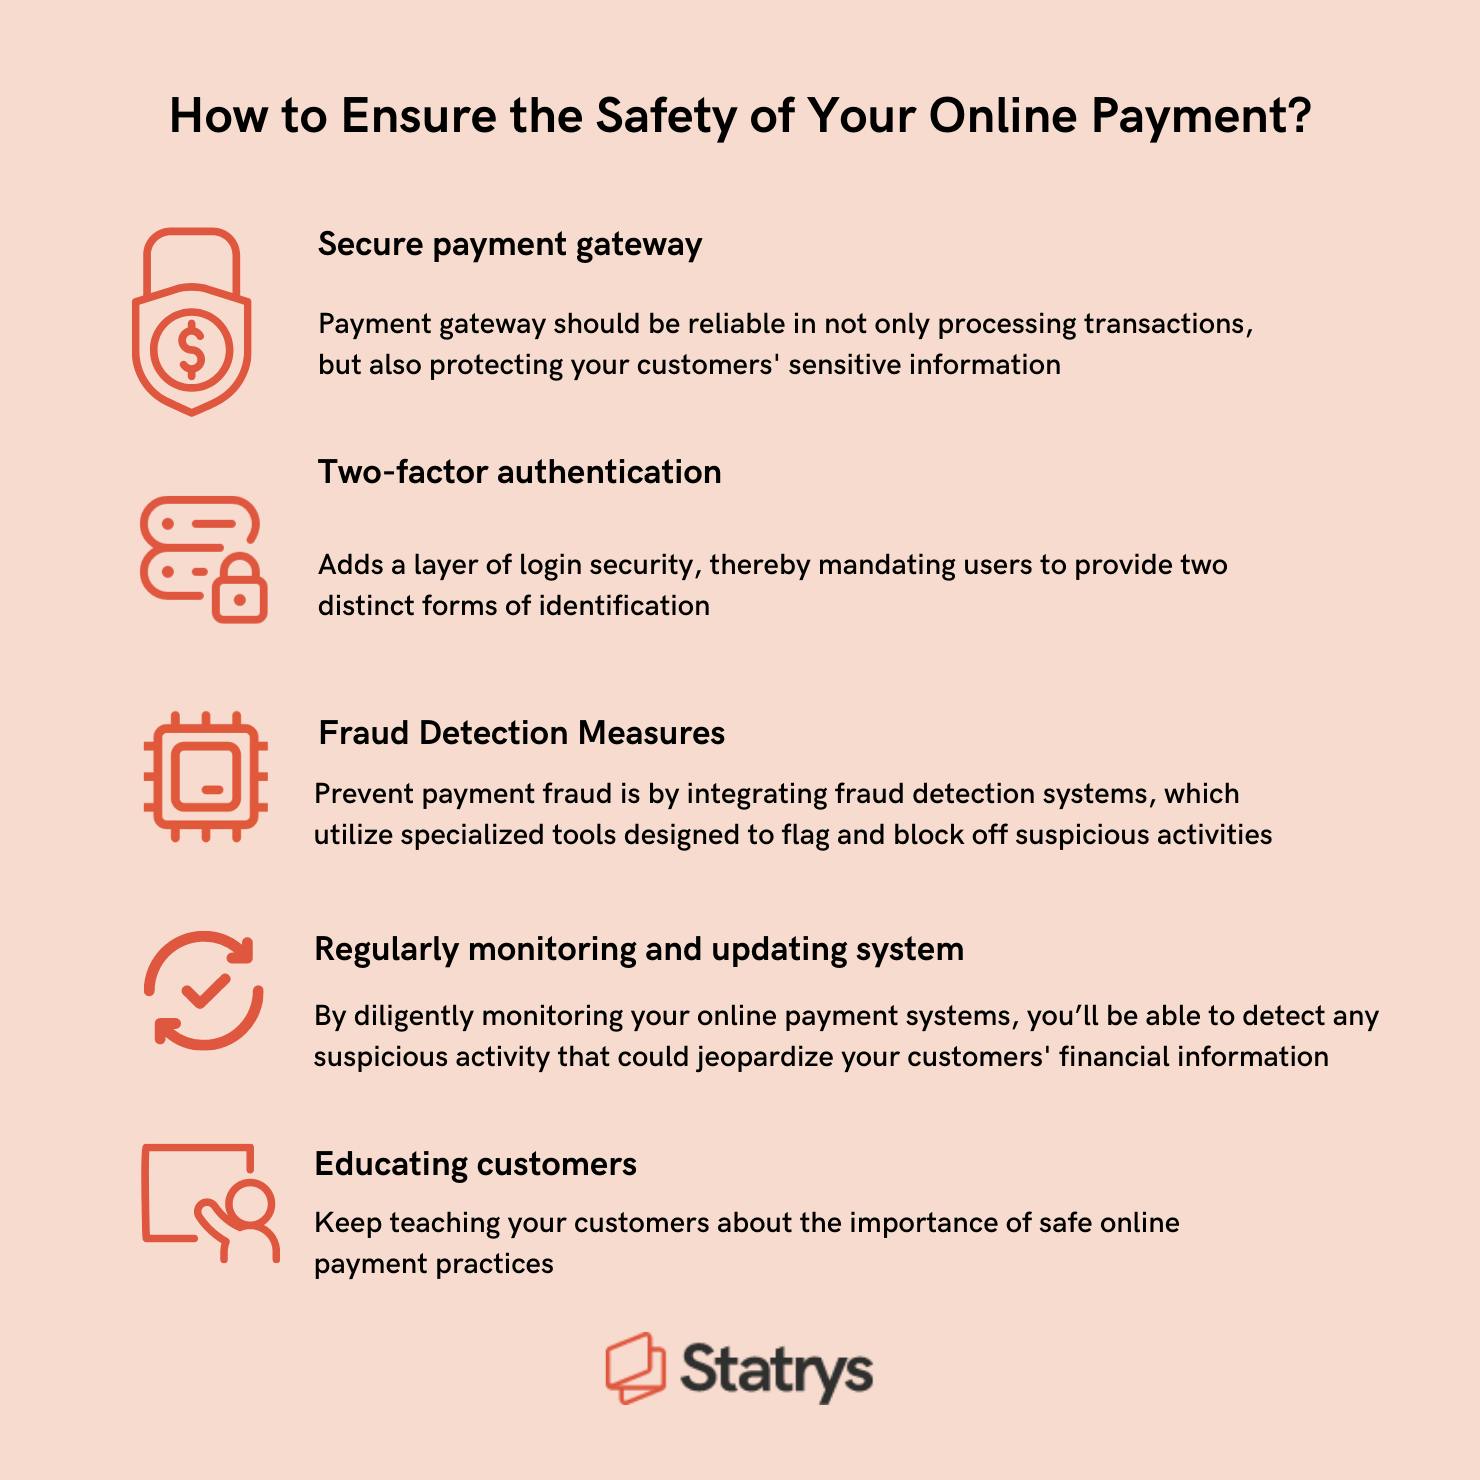 illustration showing how to ensure the safety of your online payment